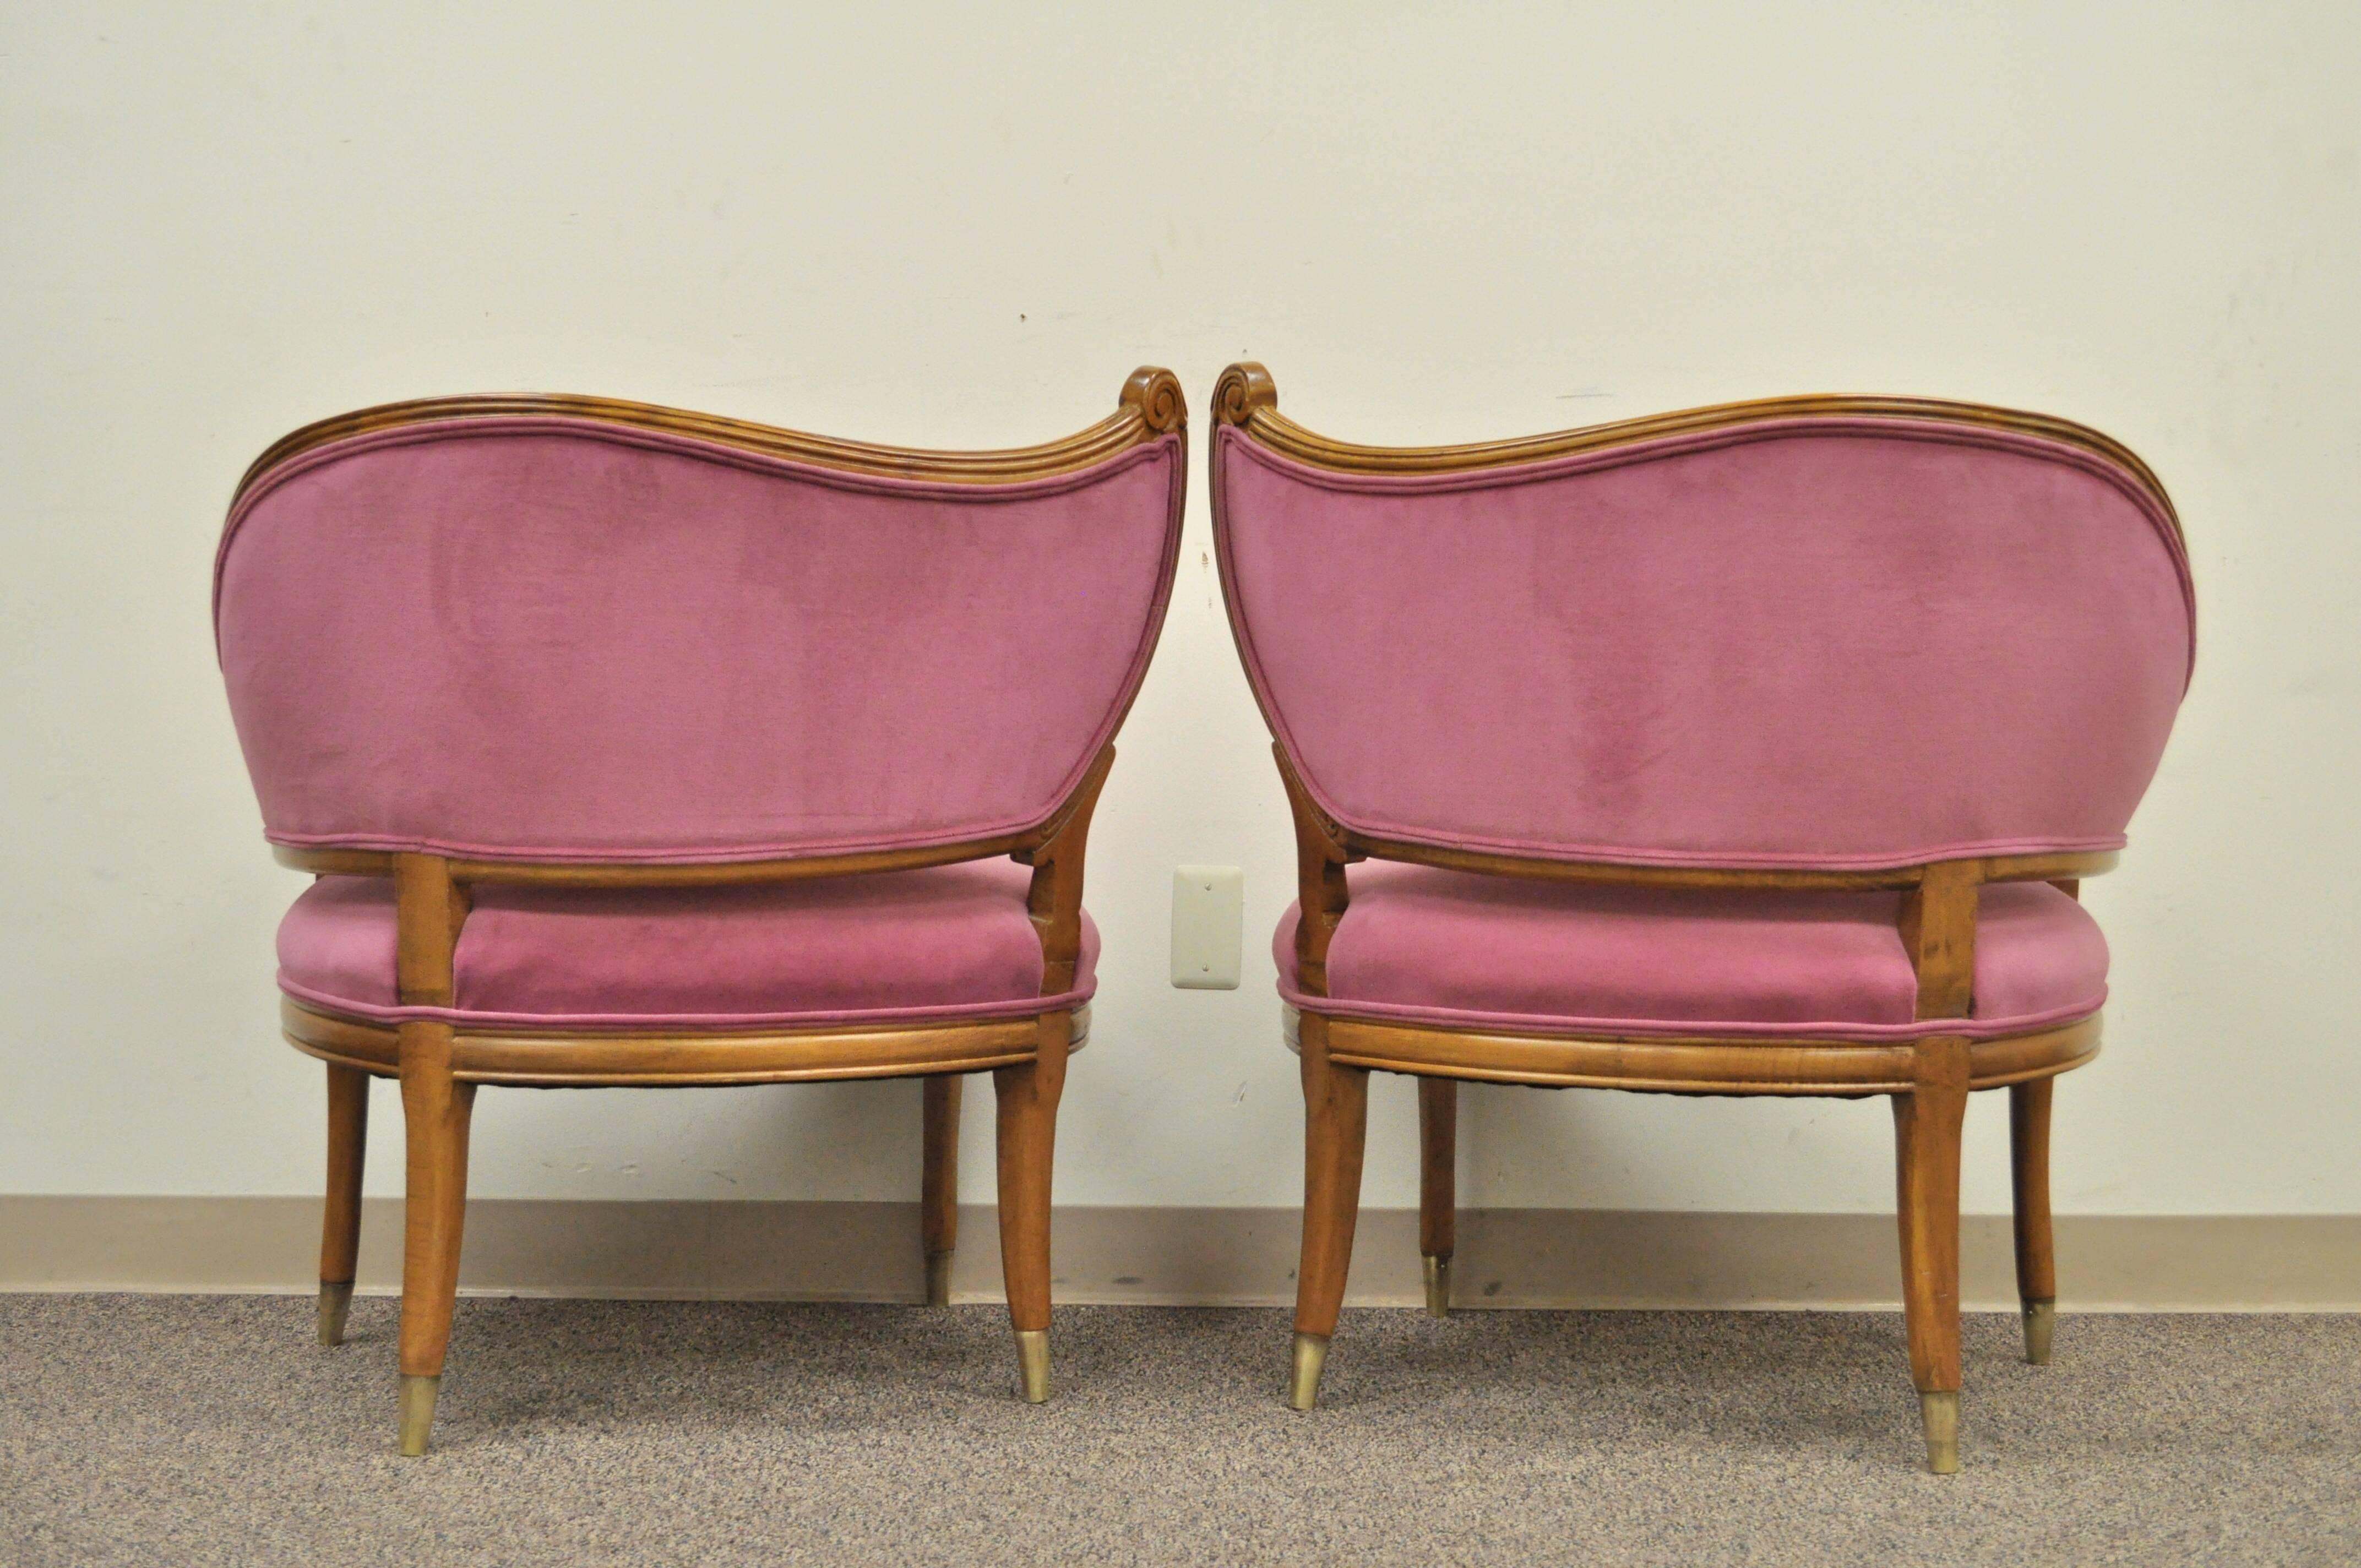 Pair of Hollywood Regency Fireside Parlor Chairs Attributed to Grosfeld House 4